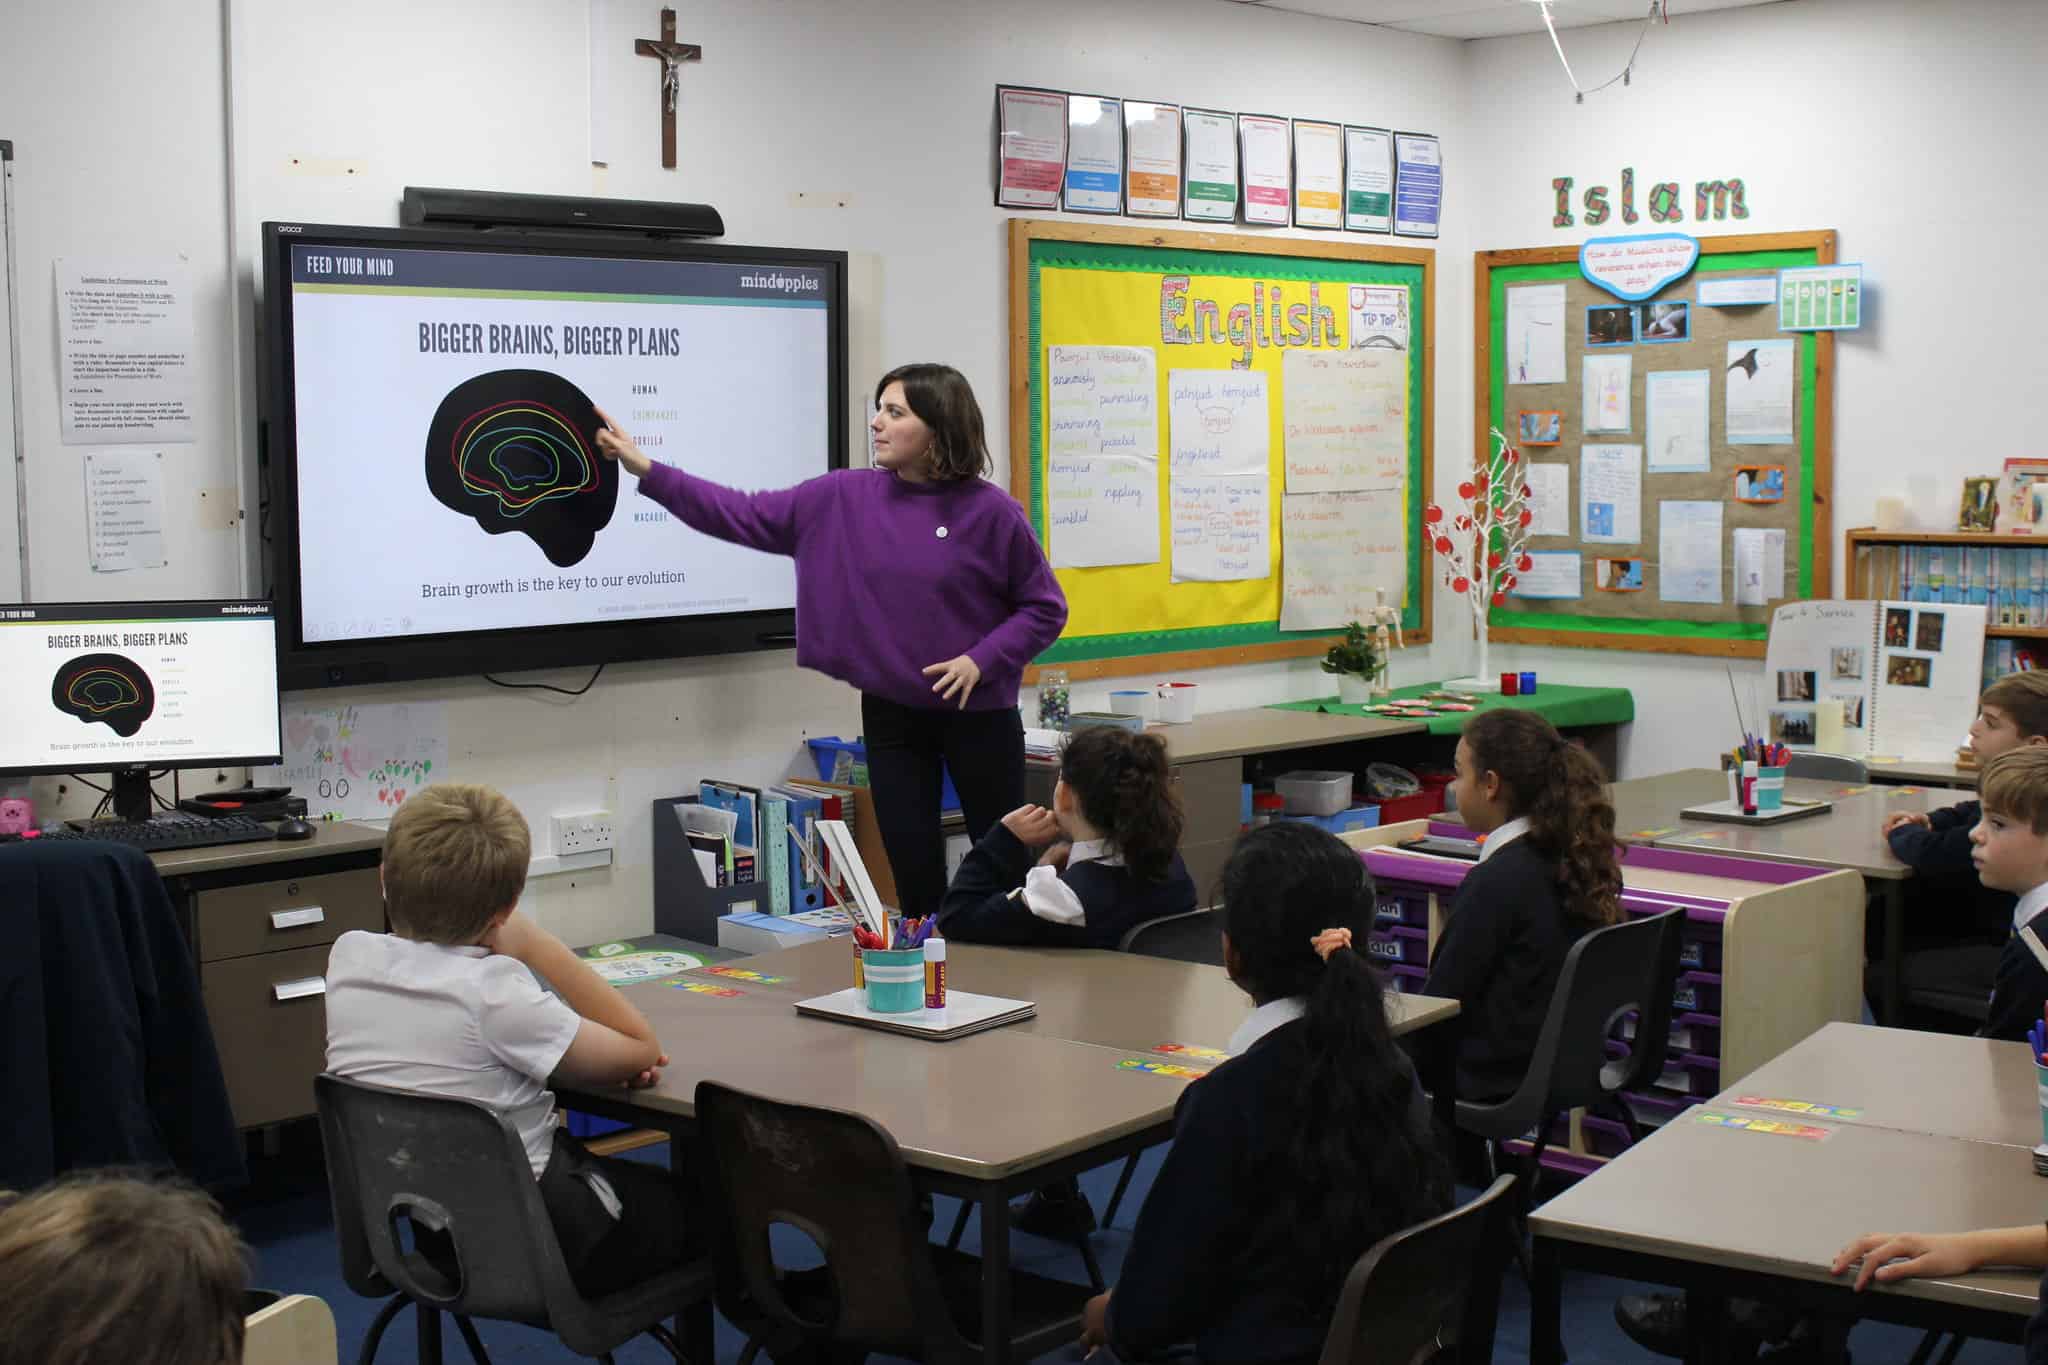 Schoolteacher in classroom pointing at whiteboard teaching children how to promote positive mental health.